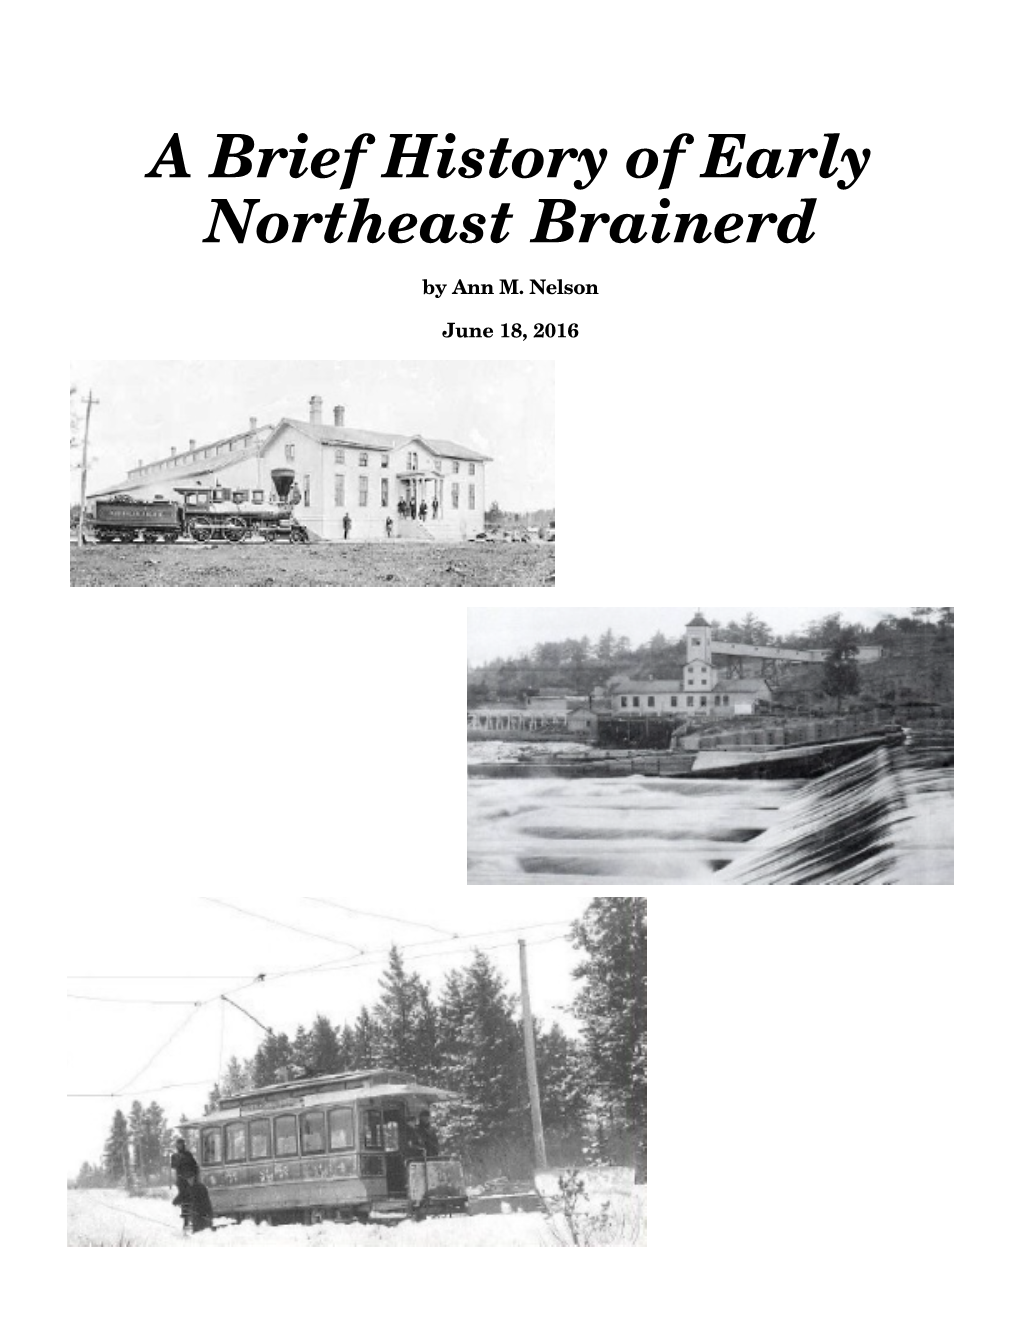 A Brief History of Early Northeast Brainerd